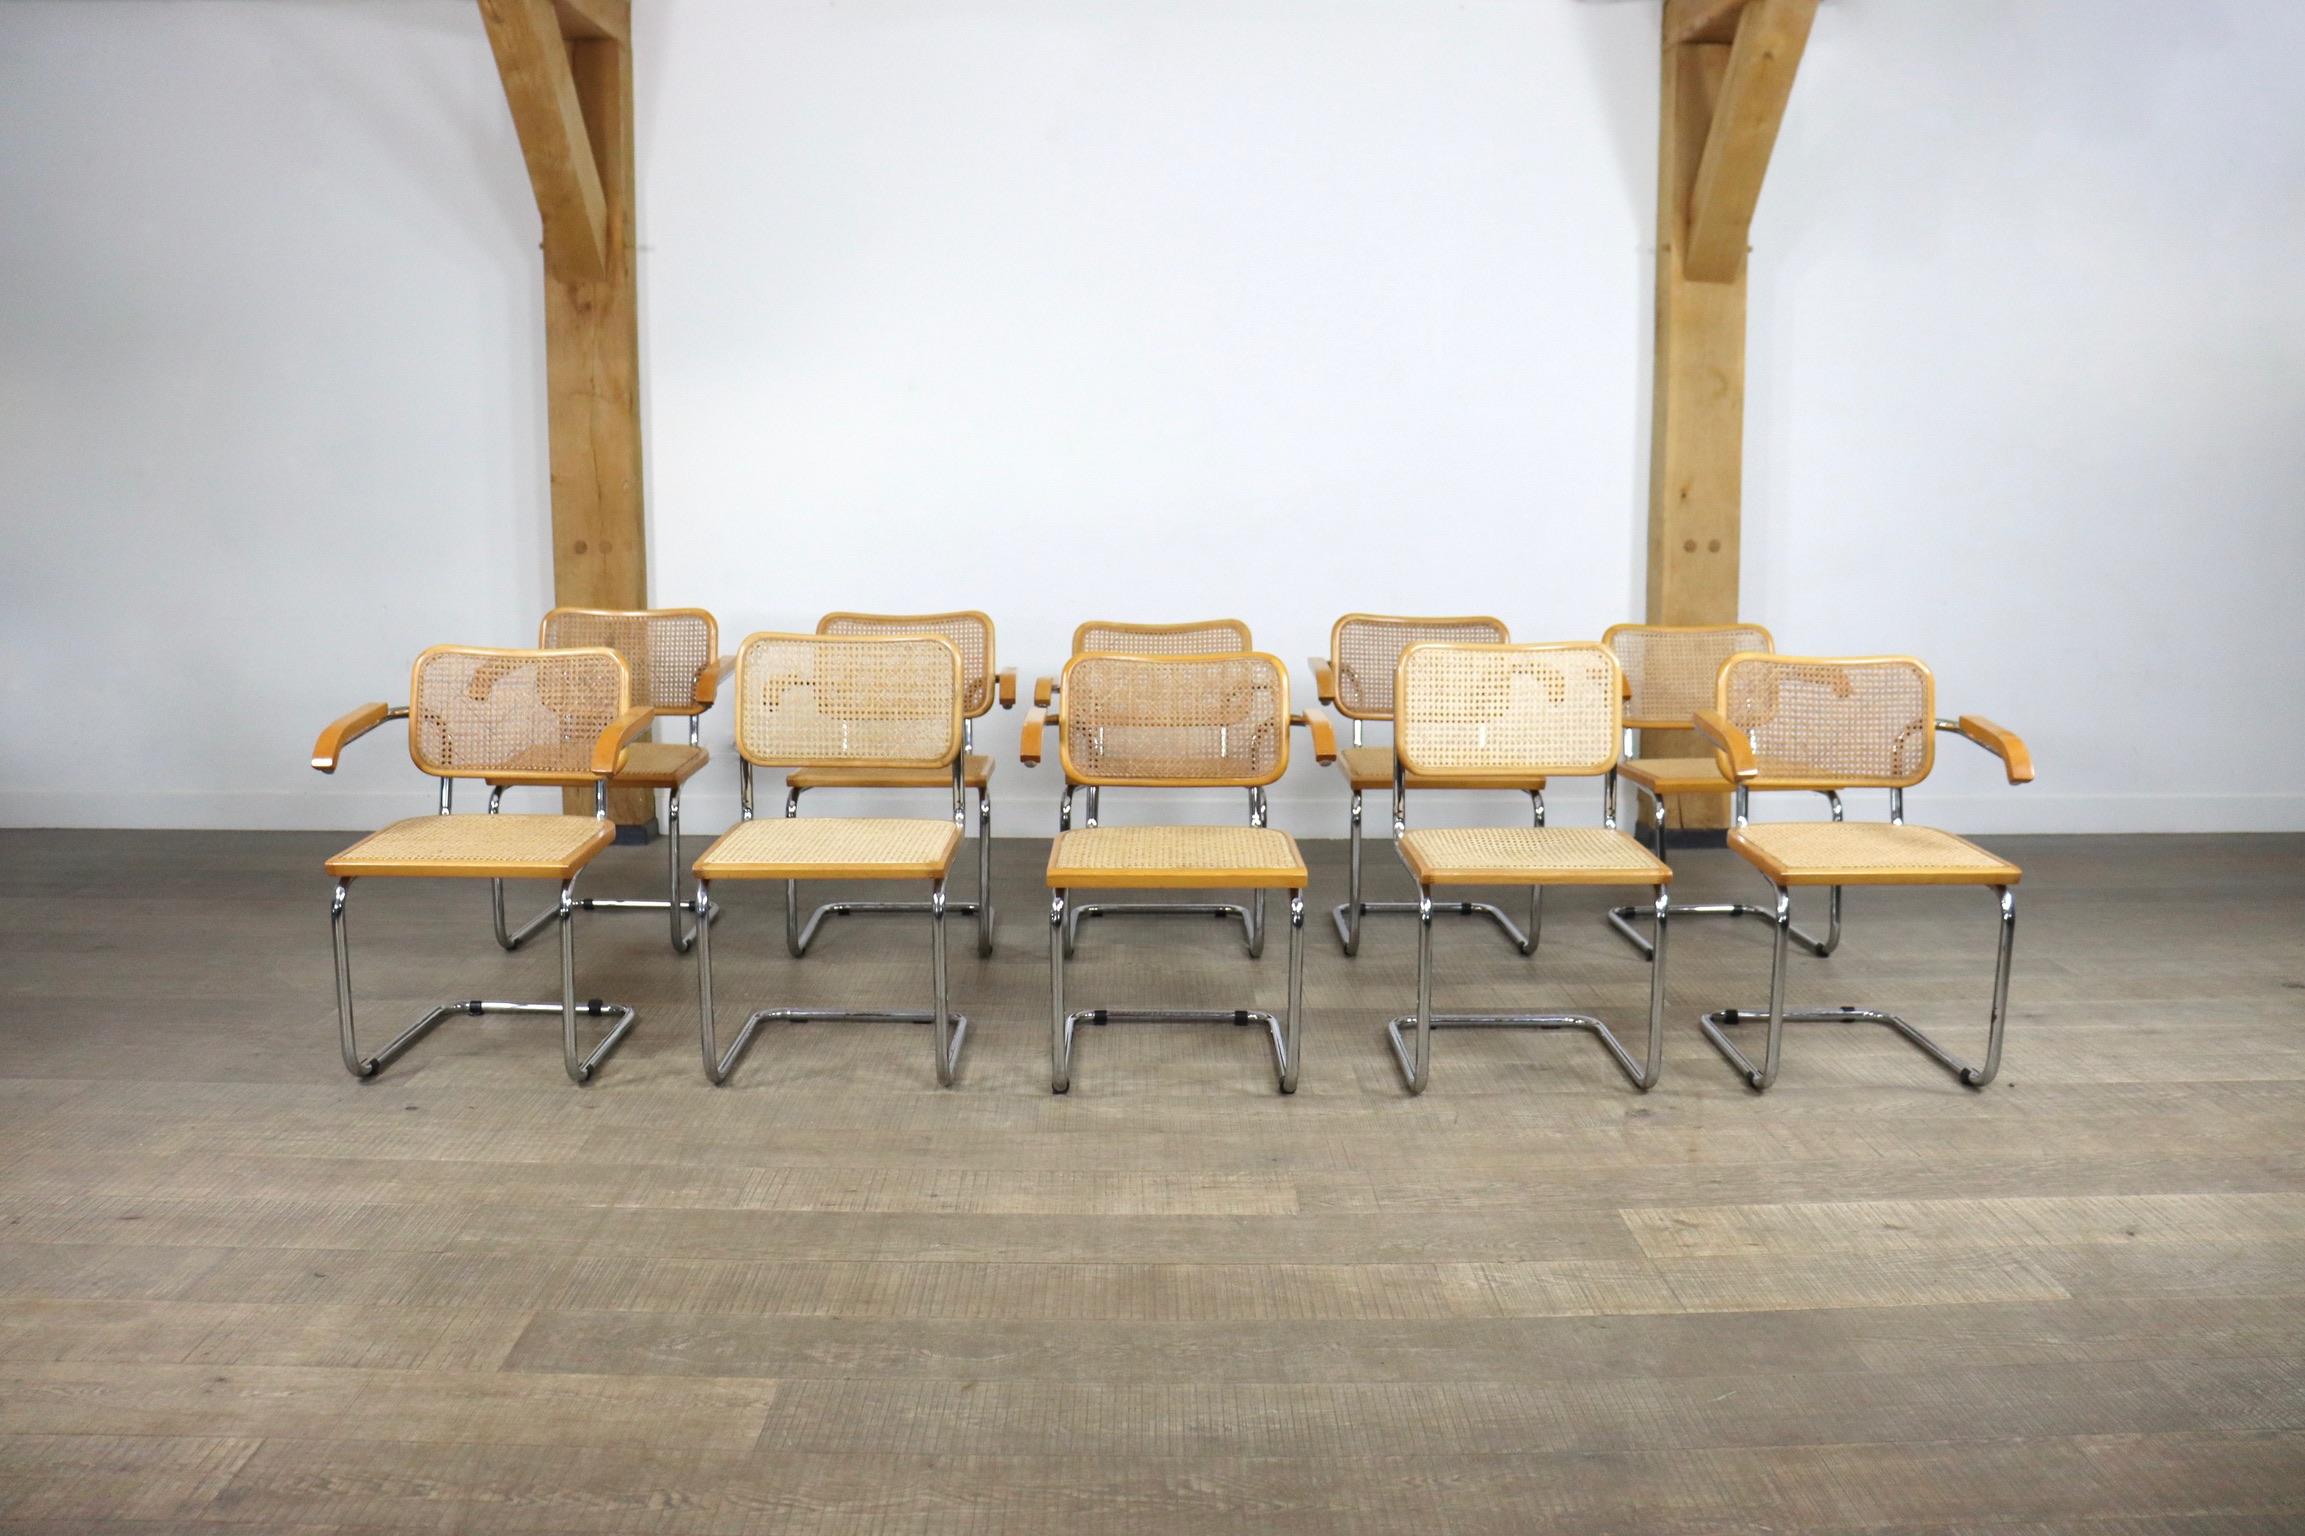 Set of 10 vintage chrome and rattan dining chairs by Marcel Breuer, model B32. Total of 10 chairs consisting of 8 chairs with armrests (B64) and 2 without (B32). The design originates from 1928, and has become an iconic design over the